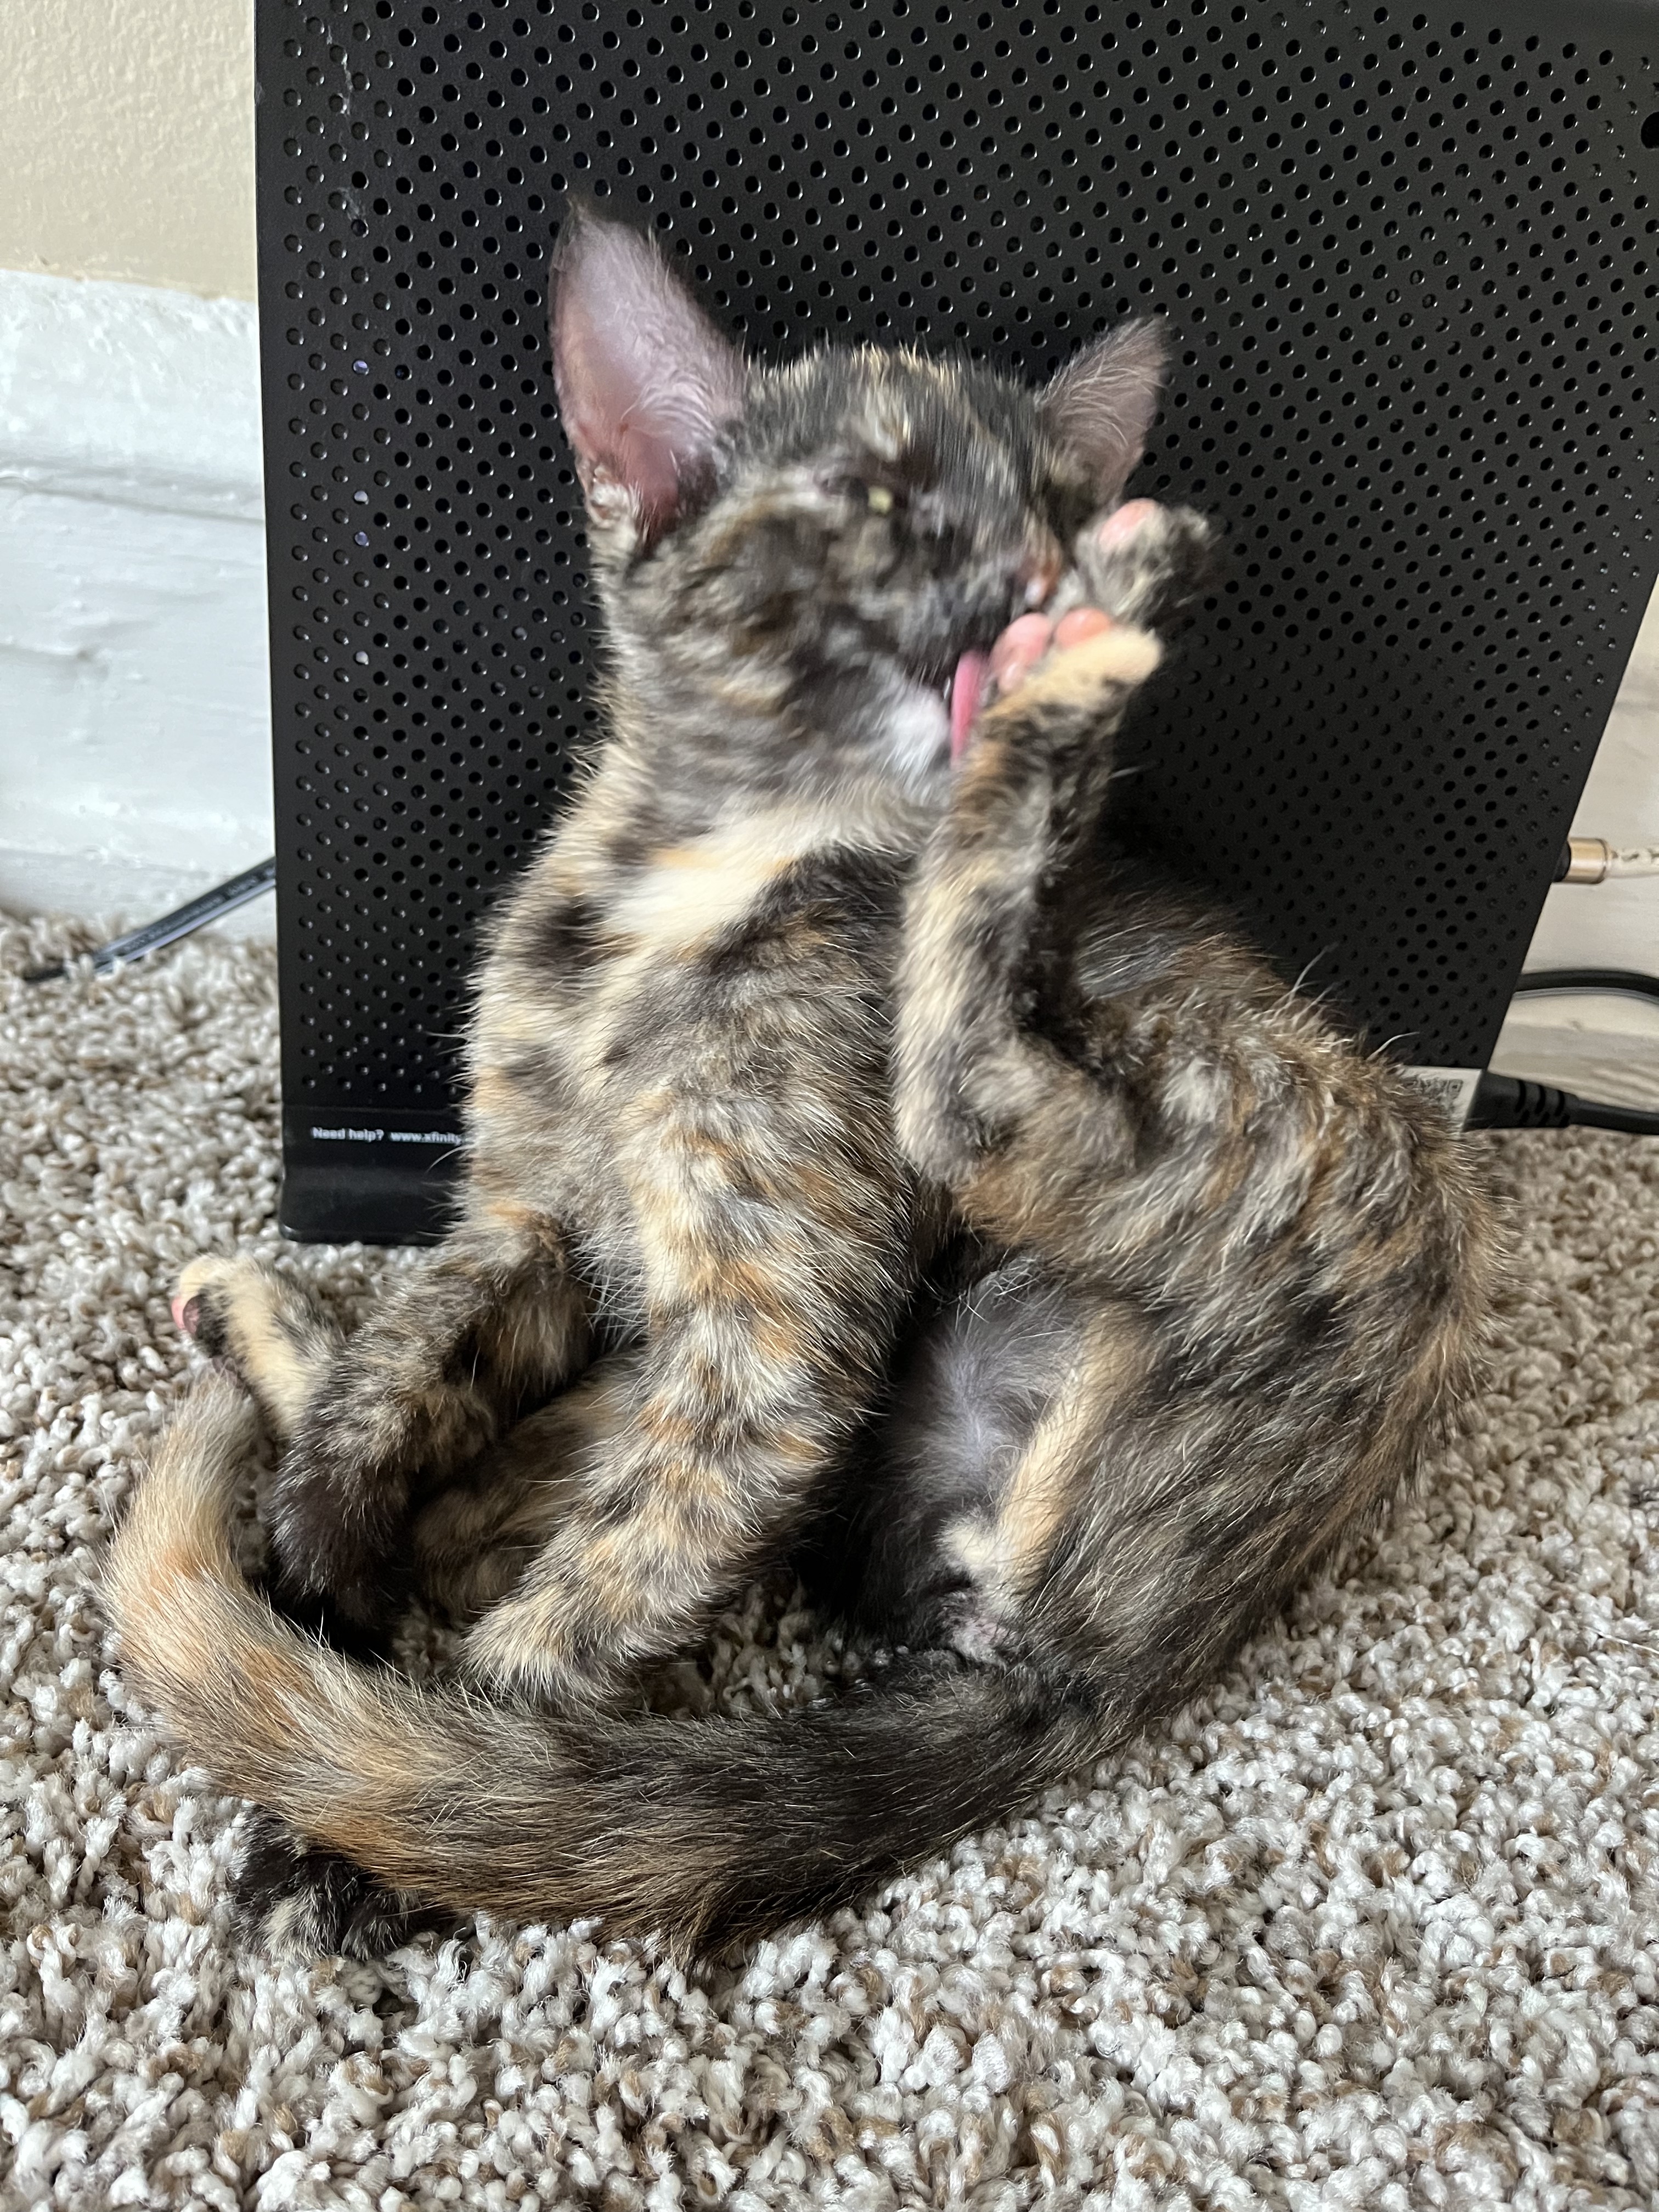 A tortie cat licking her paw